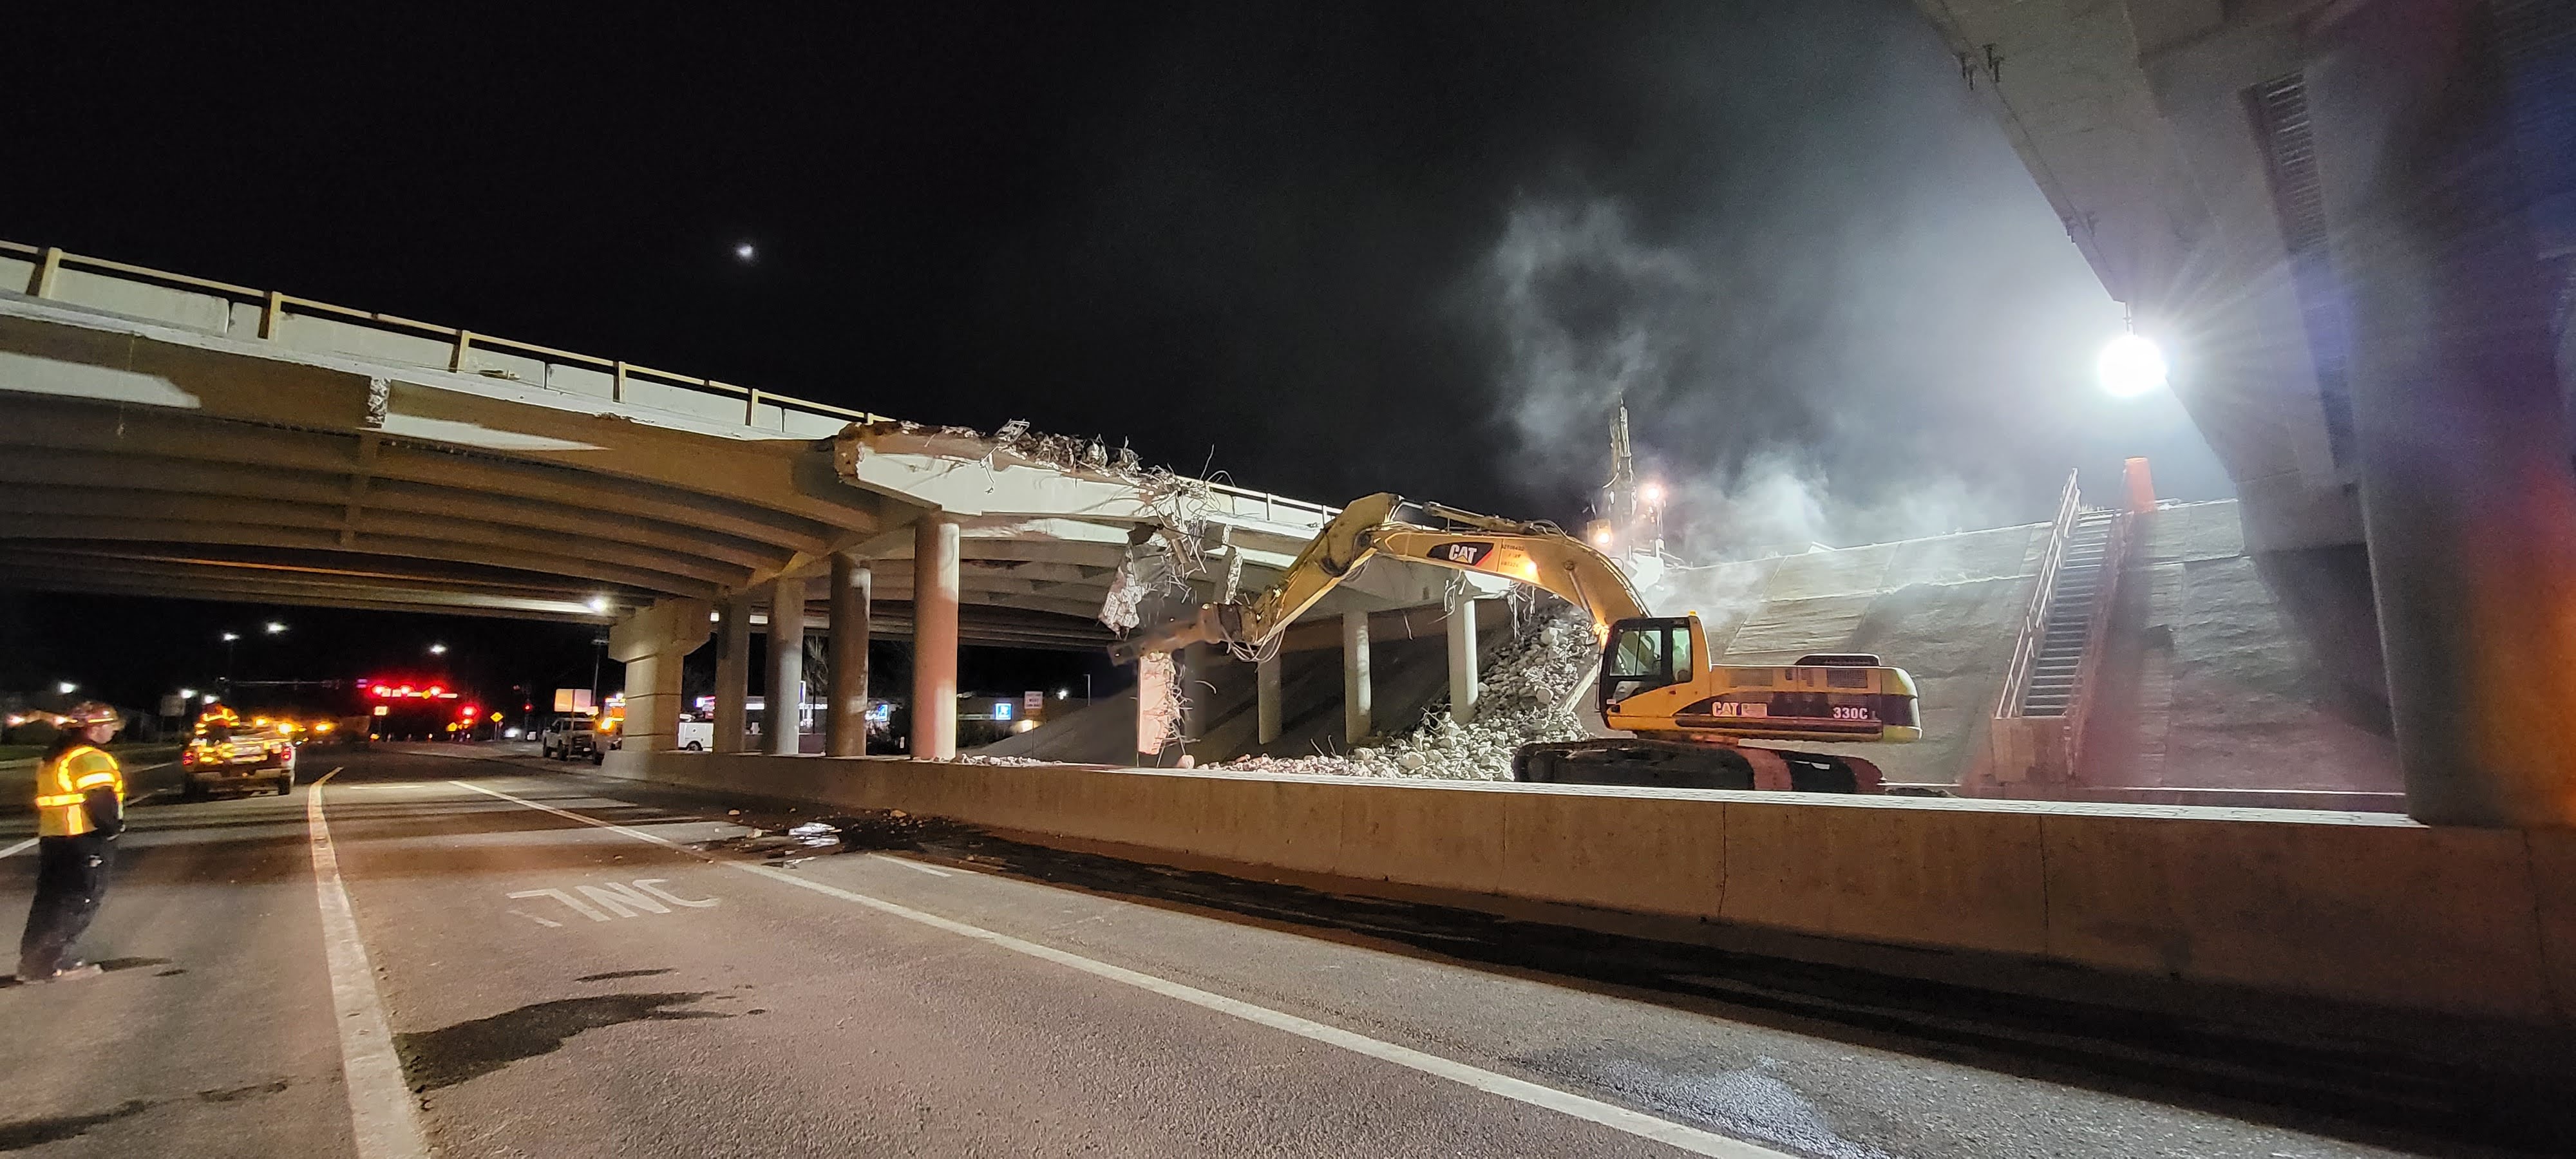 Demolition underway of easterly portion of the westbound I-70 bridge during overnight hours April 6. Photo CDOT.